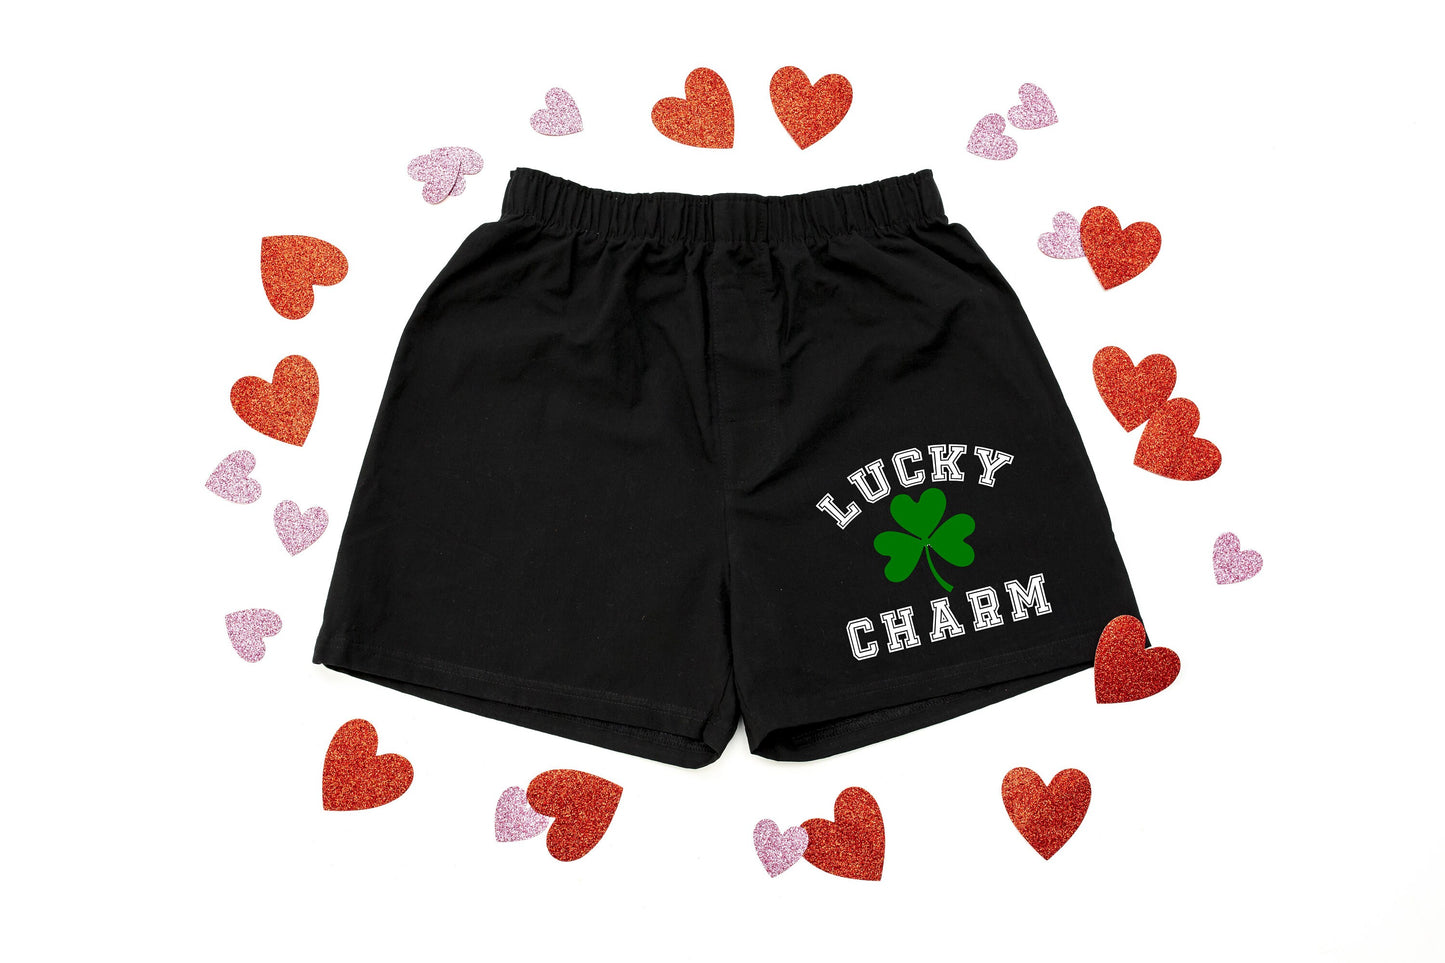 IMPROVED Lucky Charm Men's Super Soft Cotton Boxer Shorts - Gift for Him - Mens Boxers - Funny Boxers - Naughty Boxers